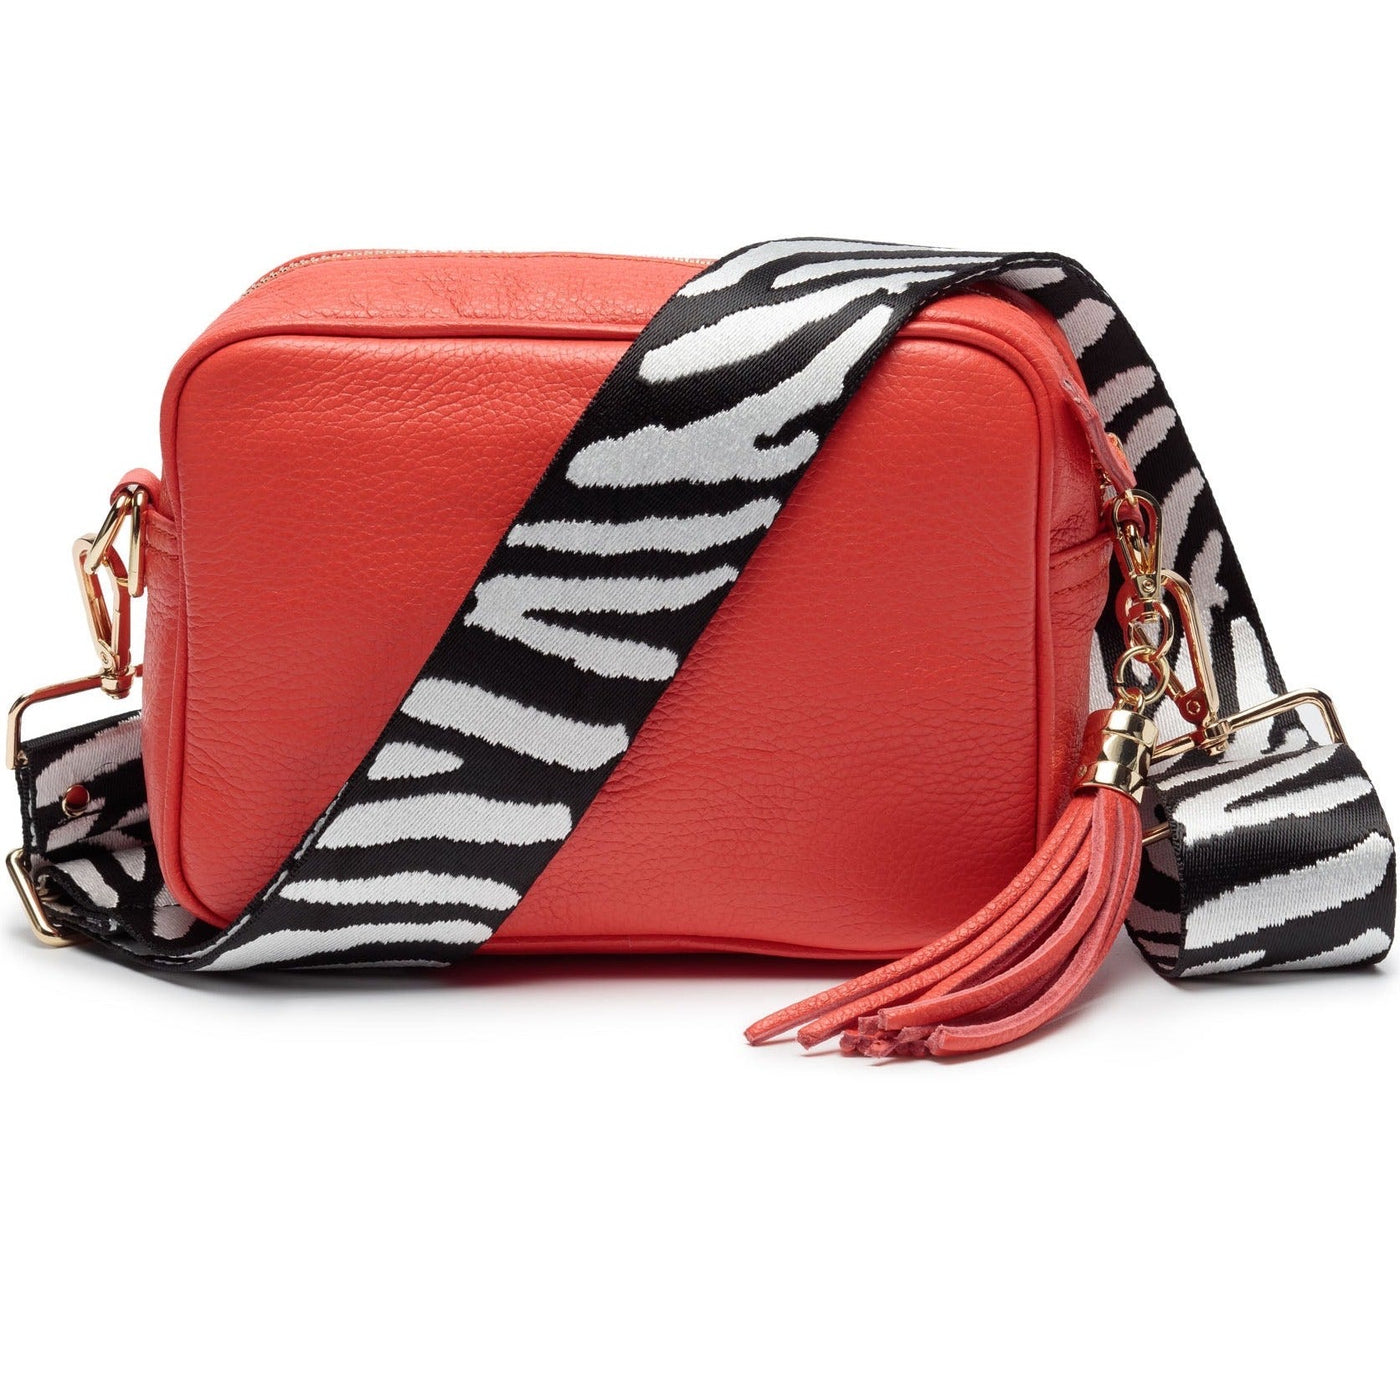 Elie Beaumont Designer Leather Crossbody Bag - Coral (GOLD Fittings)